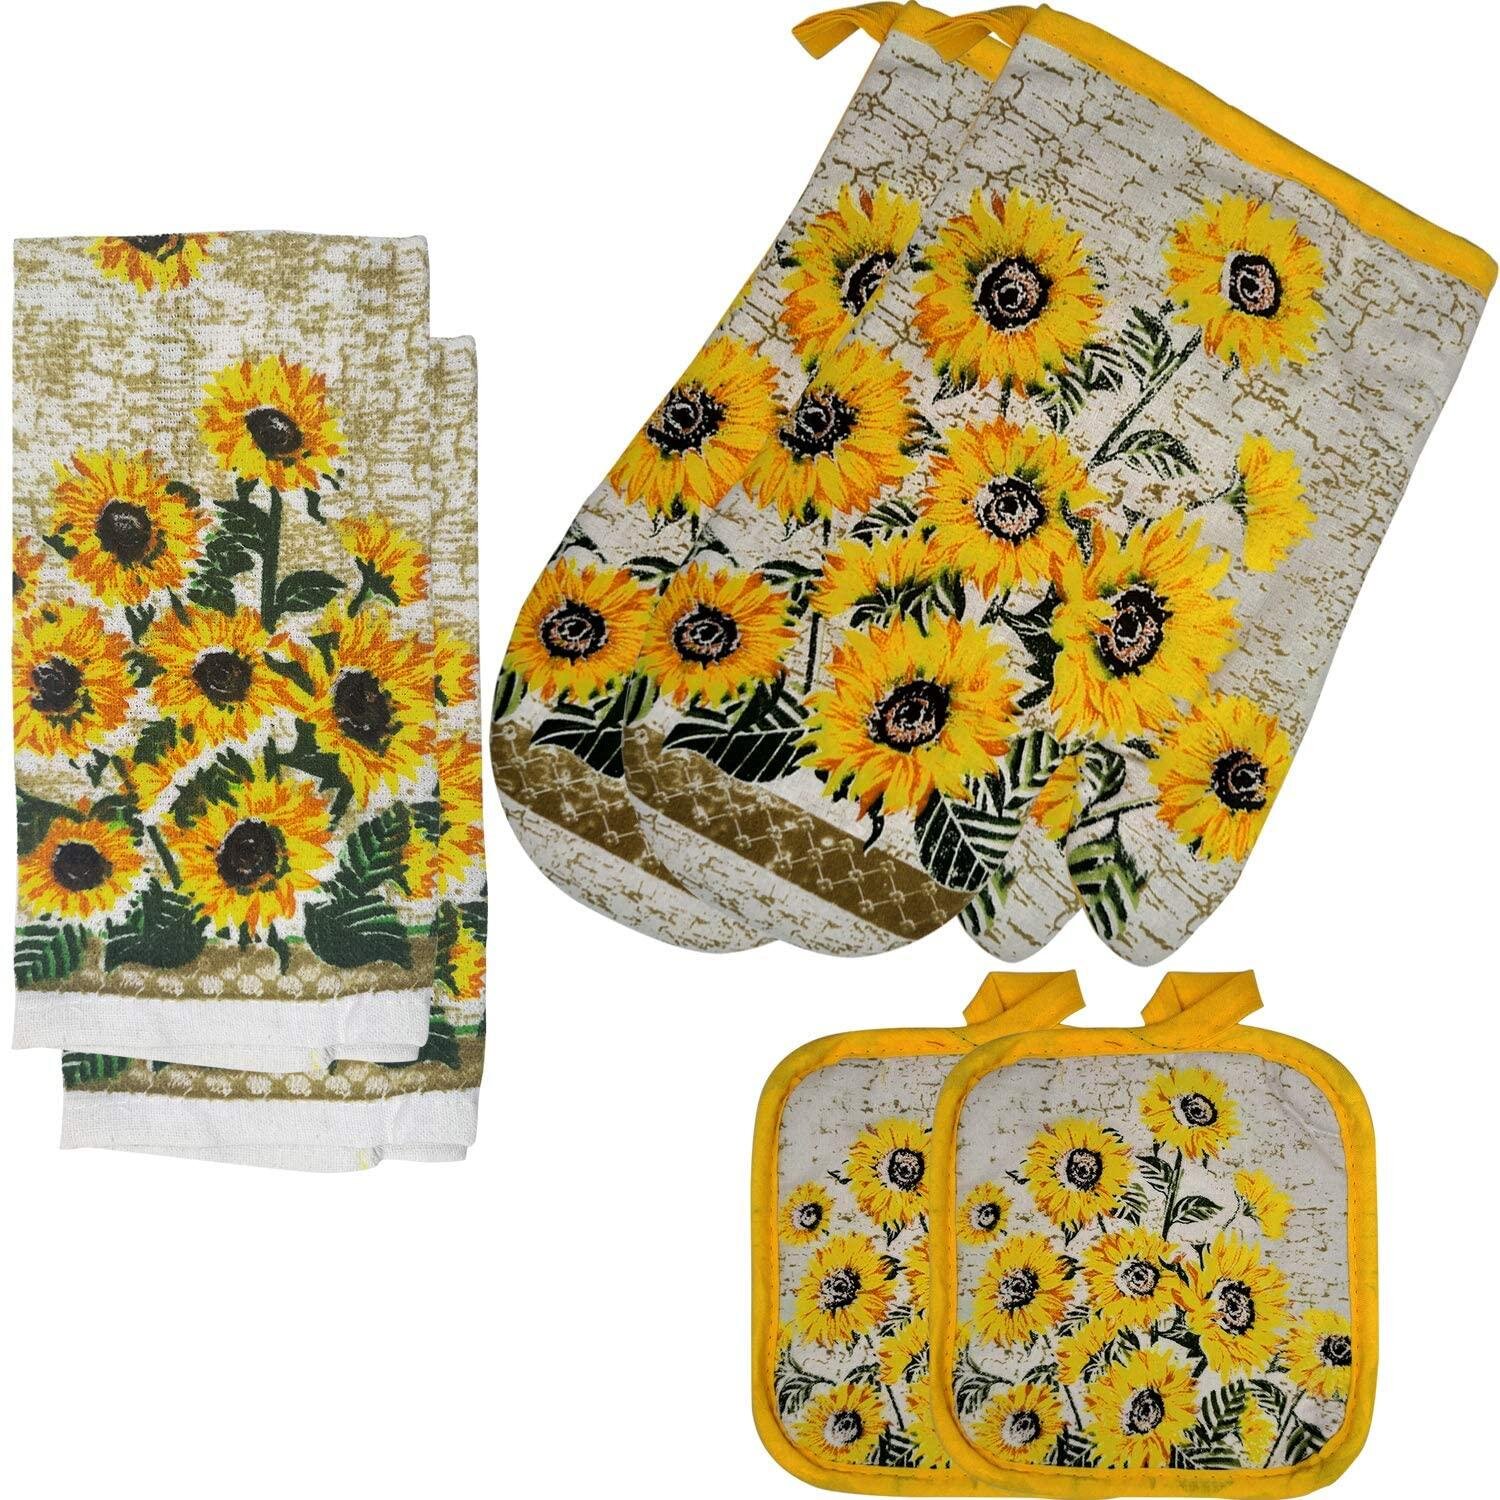 5 pc KITCHEN SET 2 POT HOLDERS,2 TOWELS & 1 OVEN MITT ROOSTER & SUNFLOWERS SL 